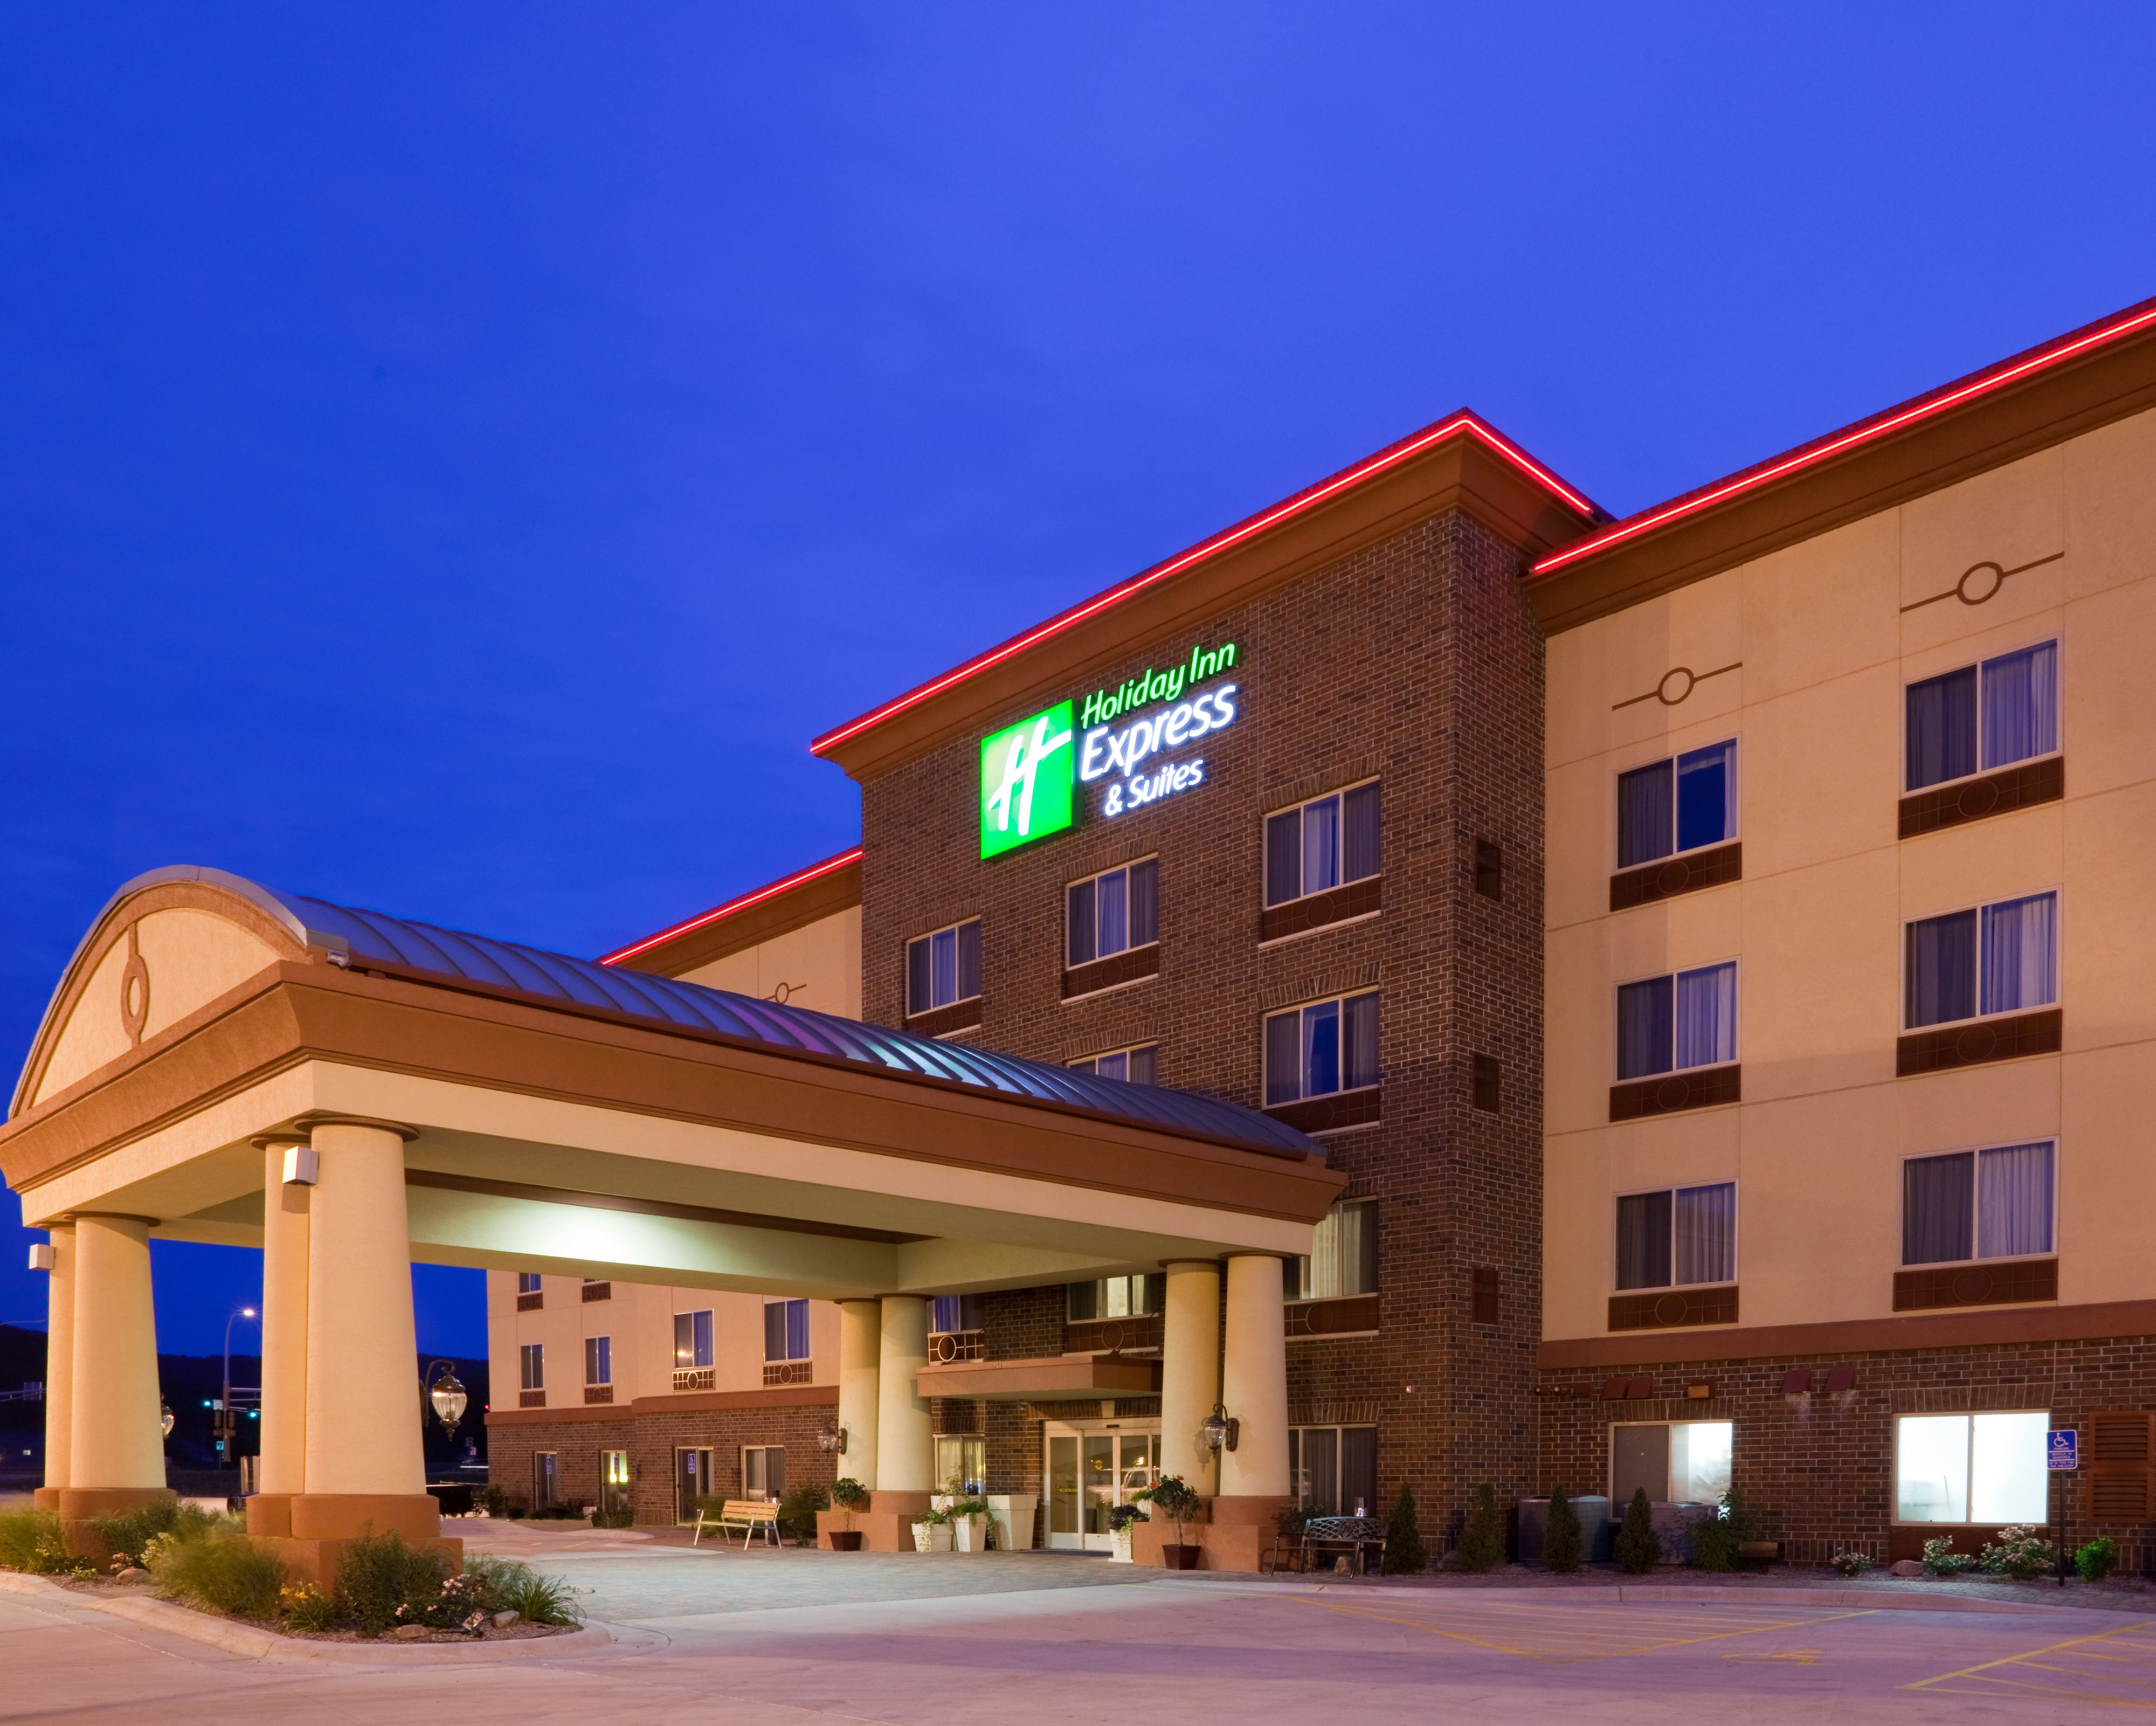 Holiday Inn Express & Suites Winona Coupons Winona MN near me | 8coupons